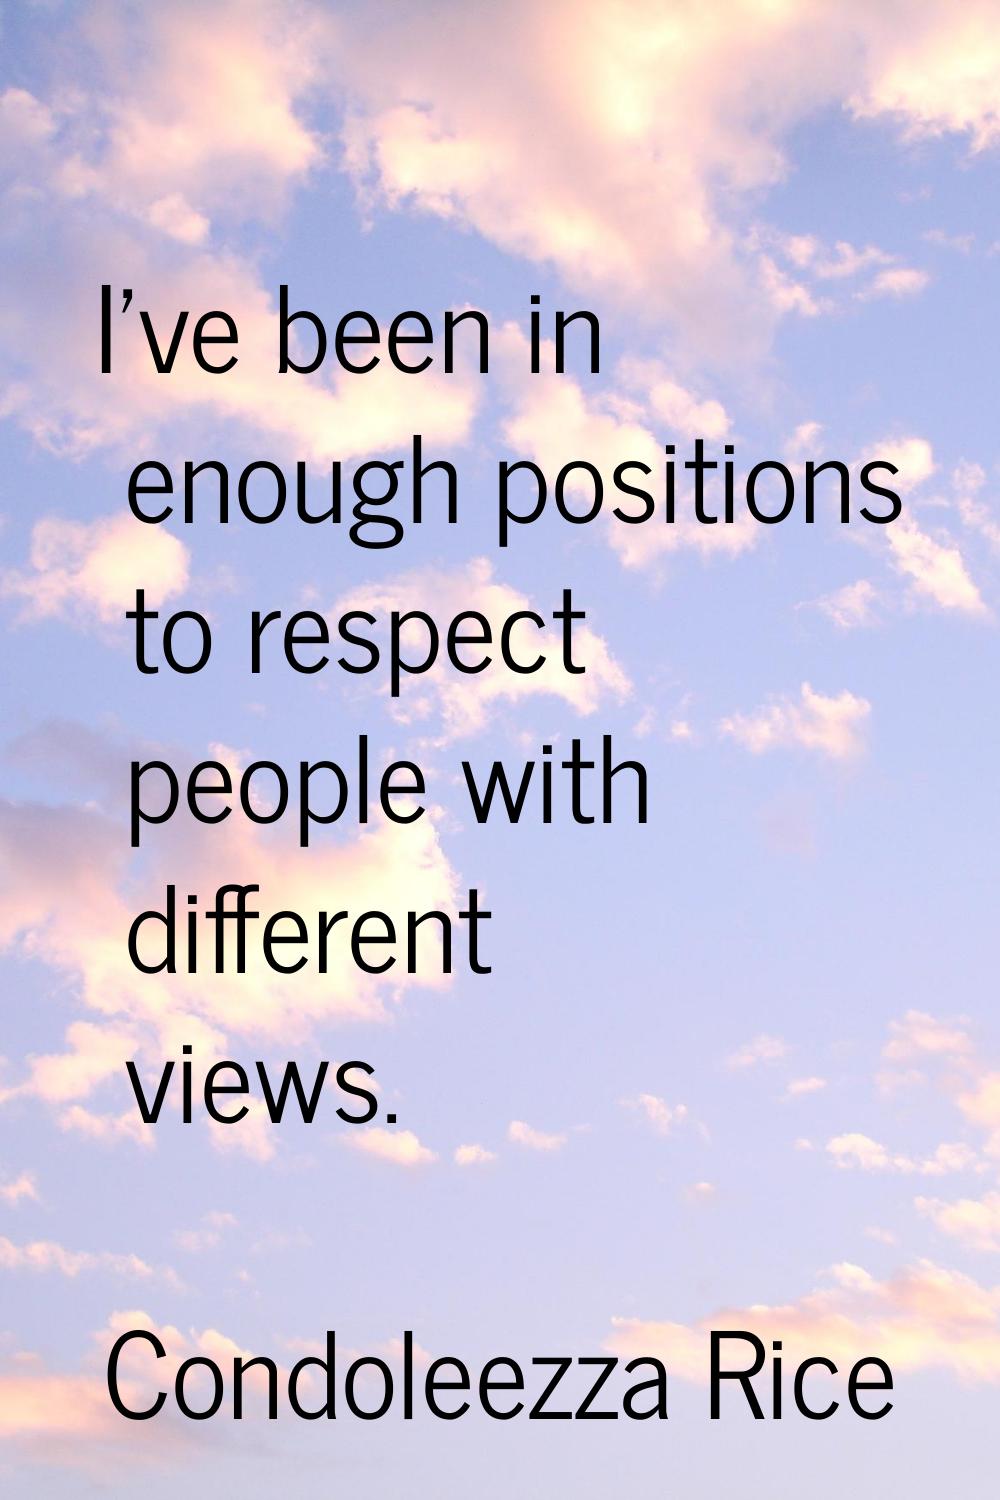 I've been in enough positions to respect people with different views.